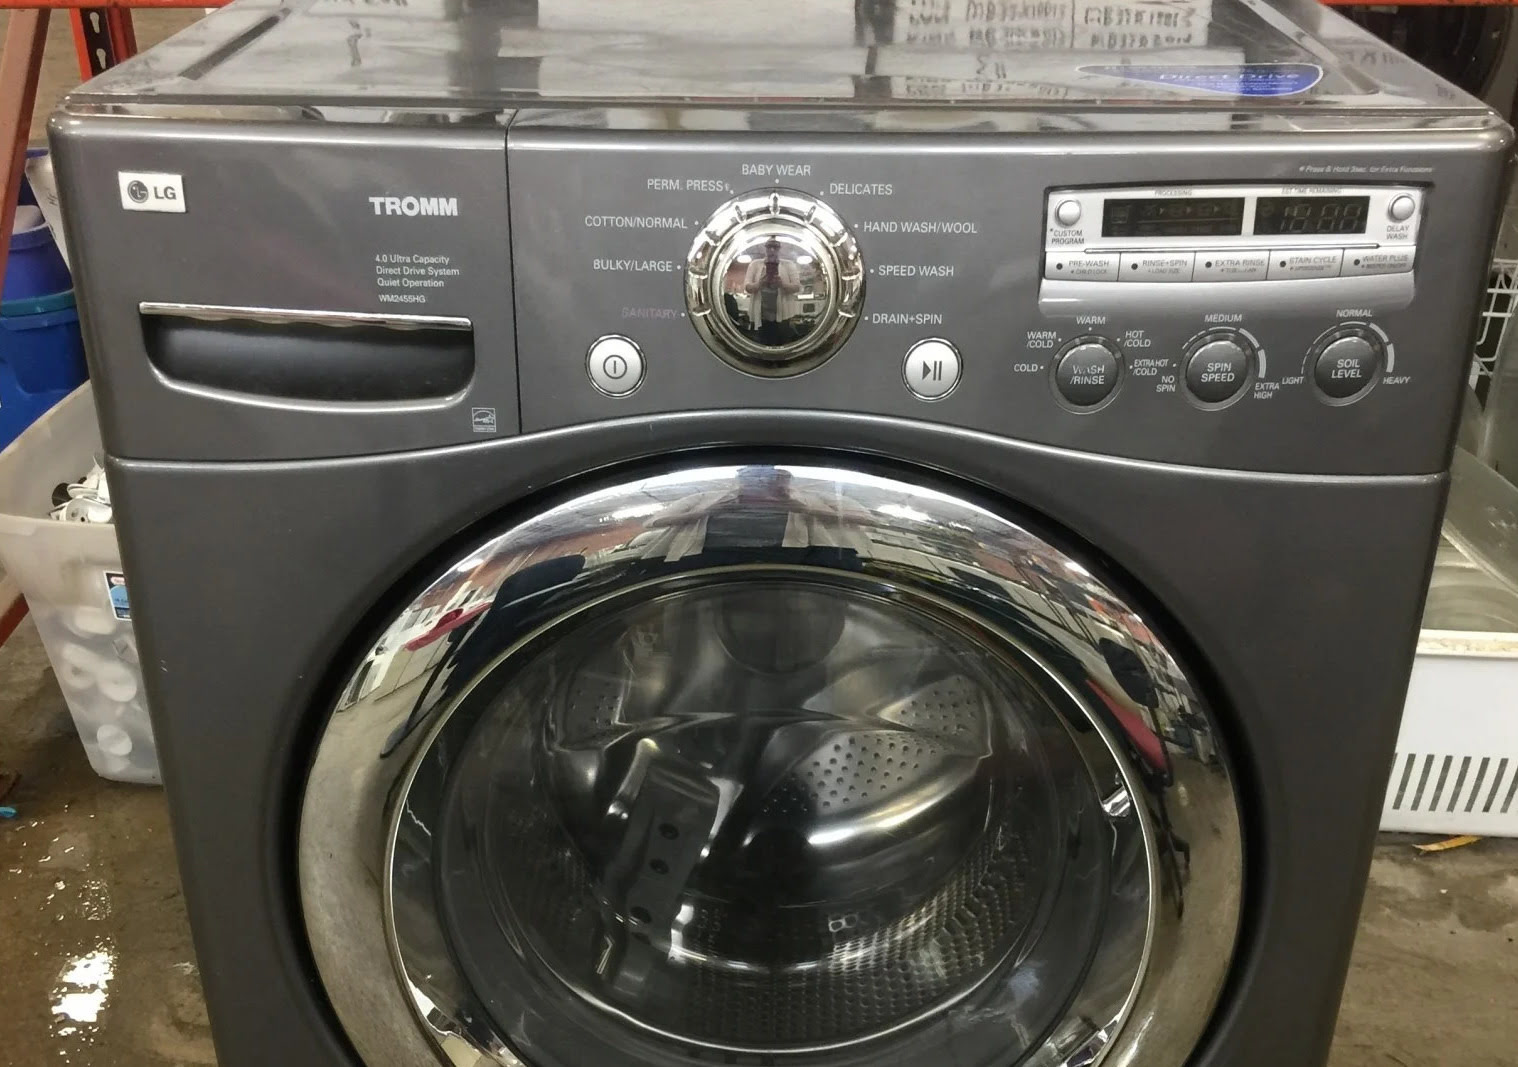 How To Fix The Error Code BE For LG Washing Machine